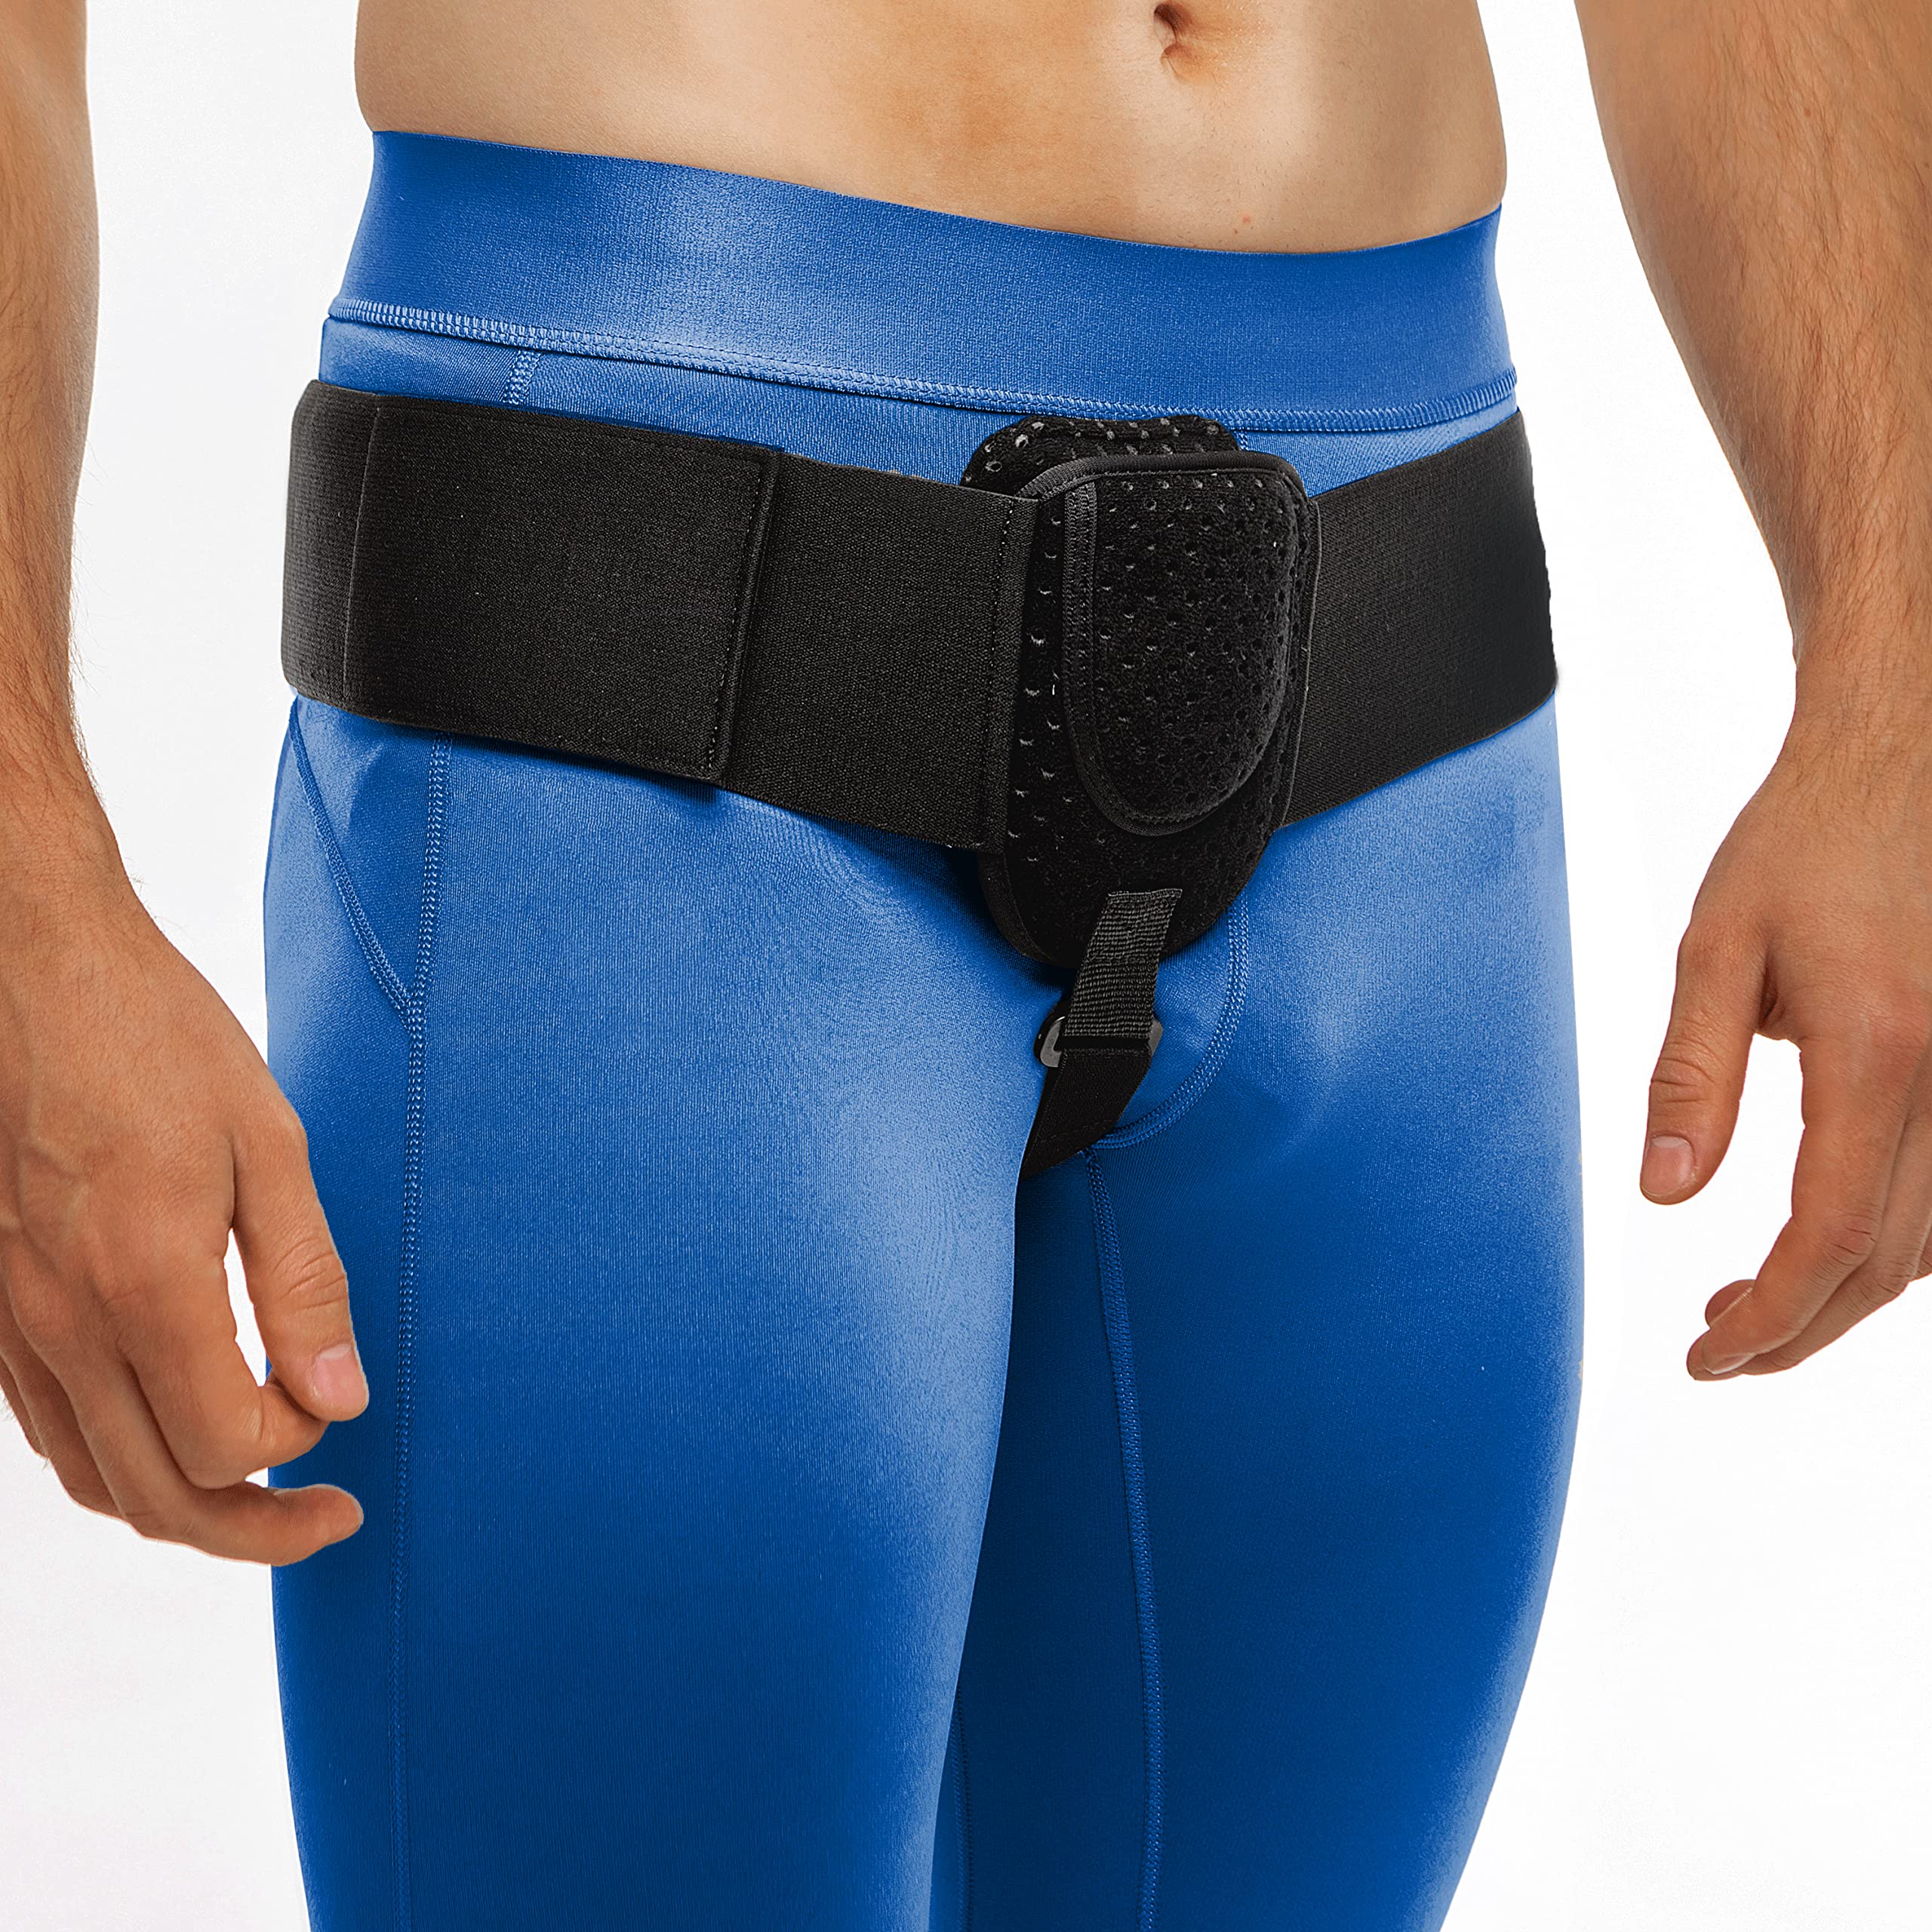 Hernia Belts for Men and Women - Adjustable Right or Left Side